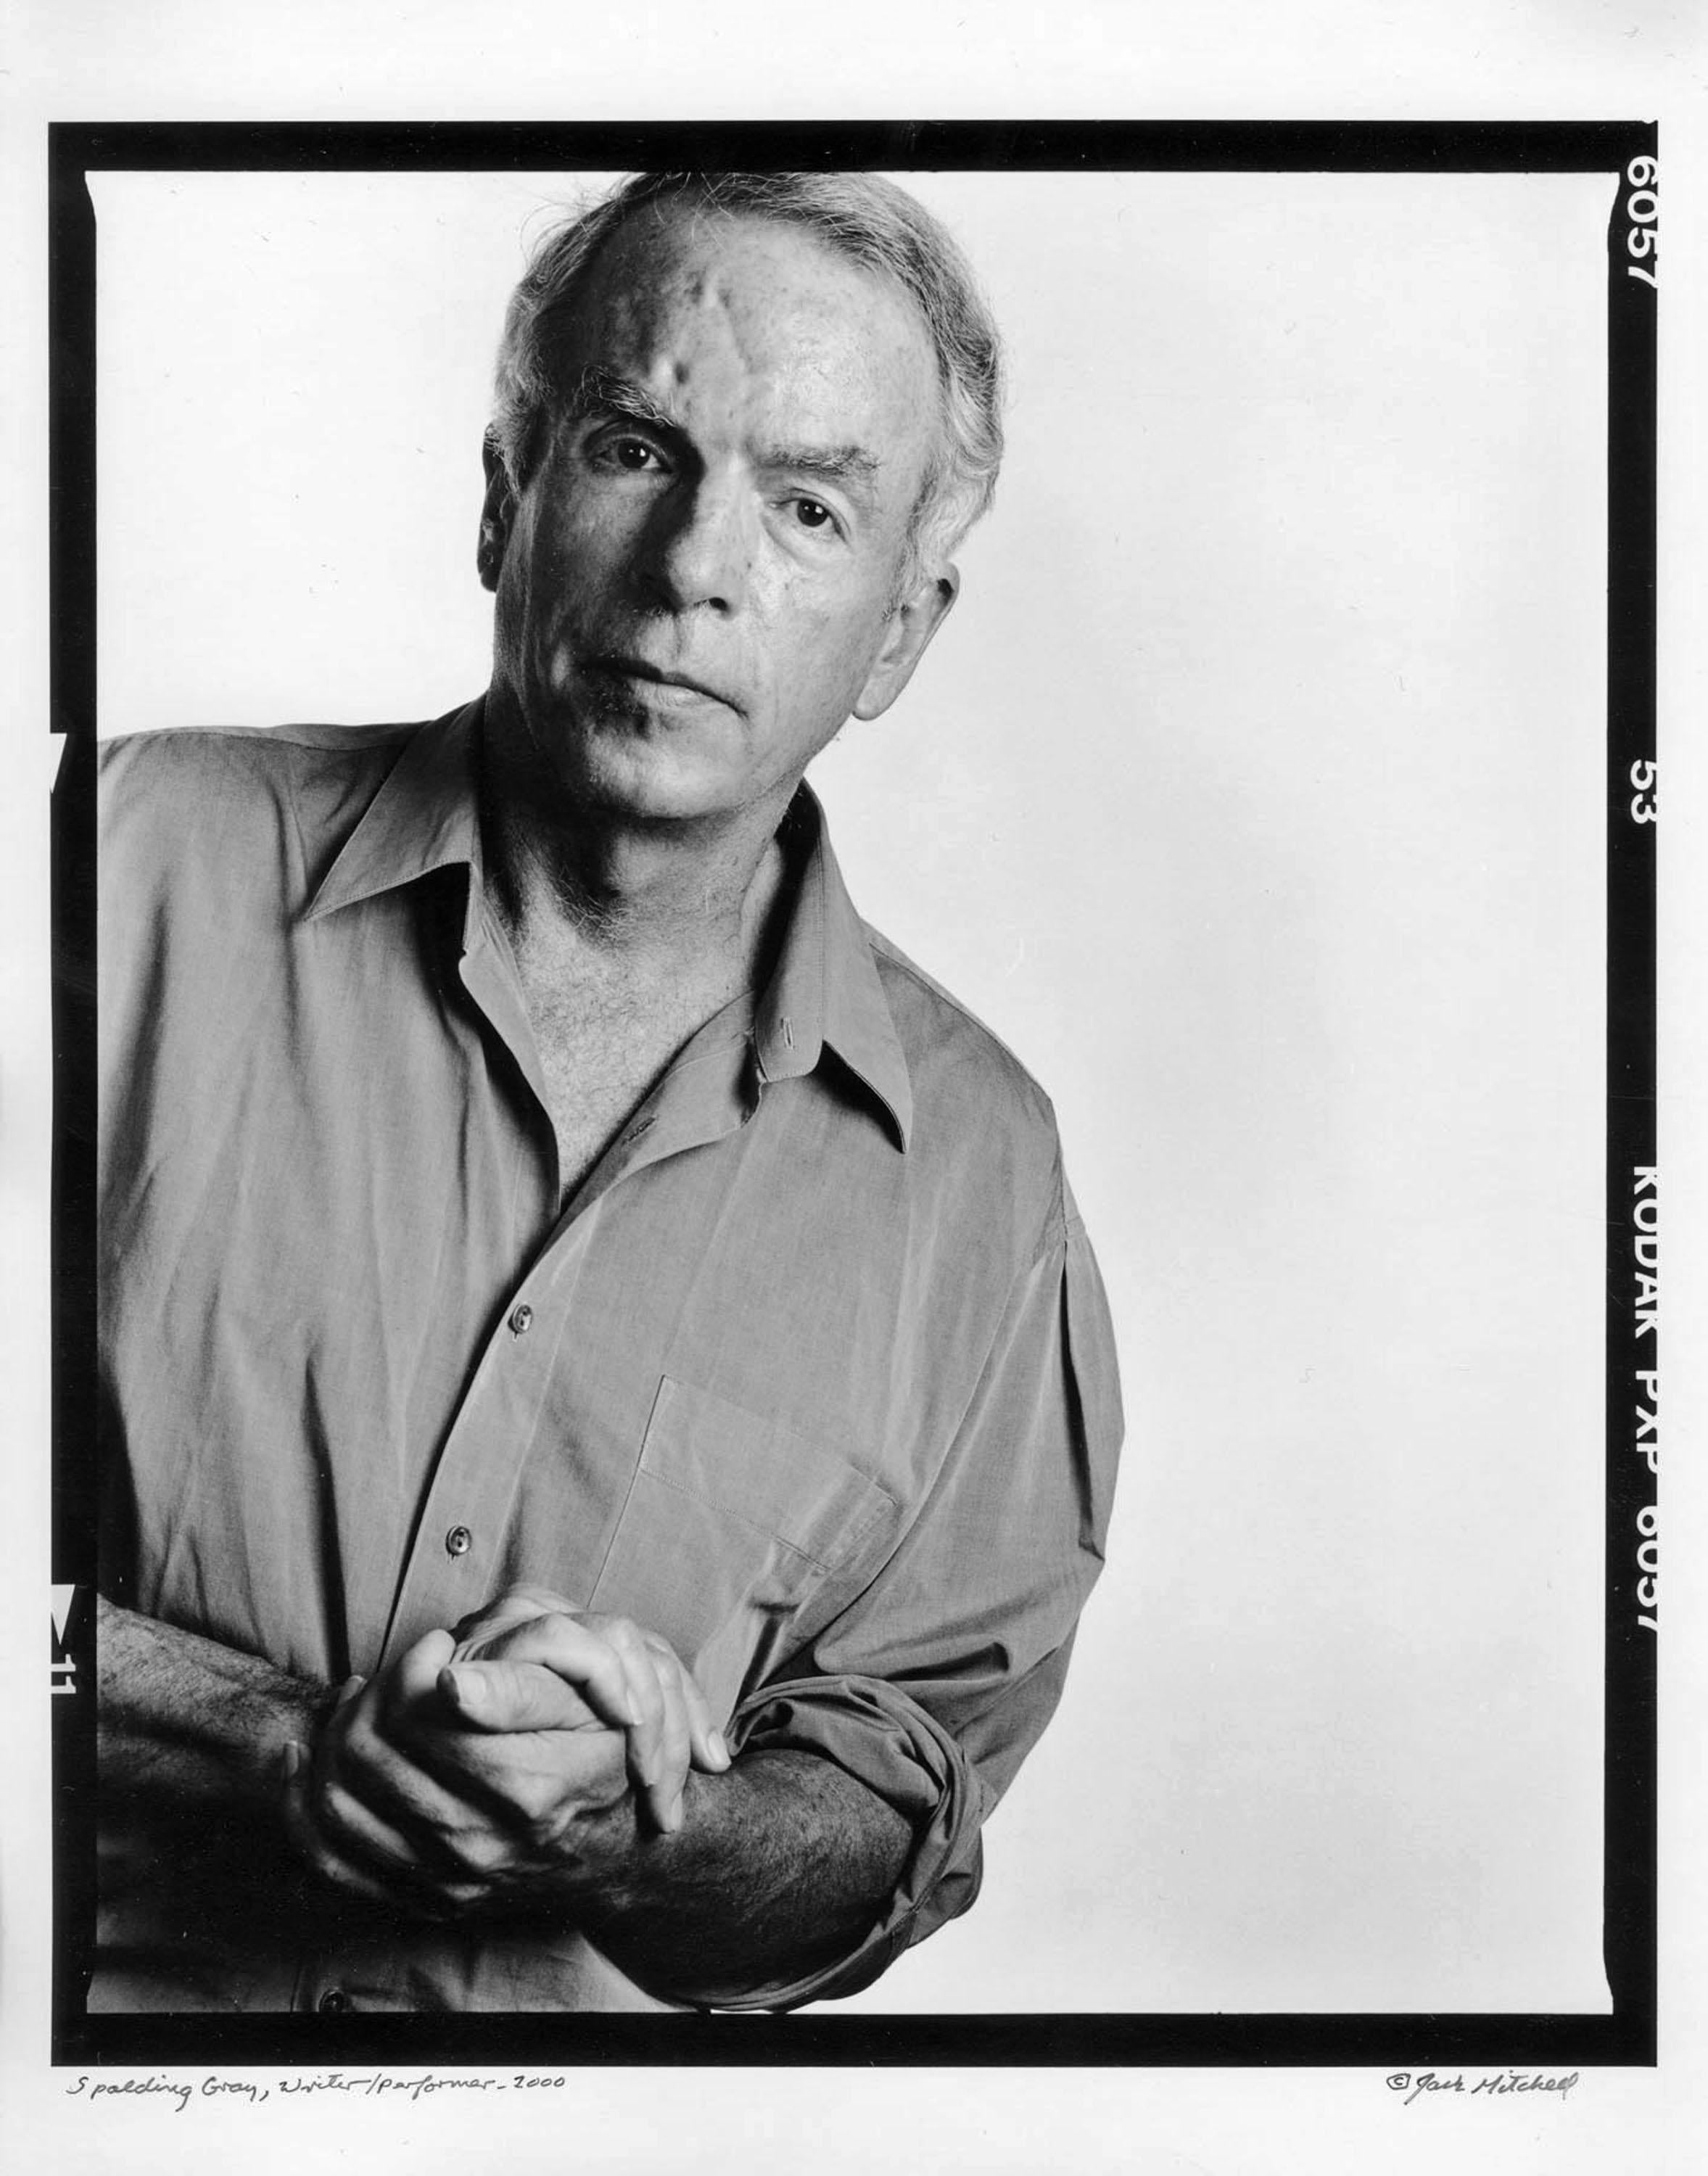  Writer/performer Spalding Gray, signed by Jack Mitchell